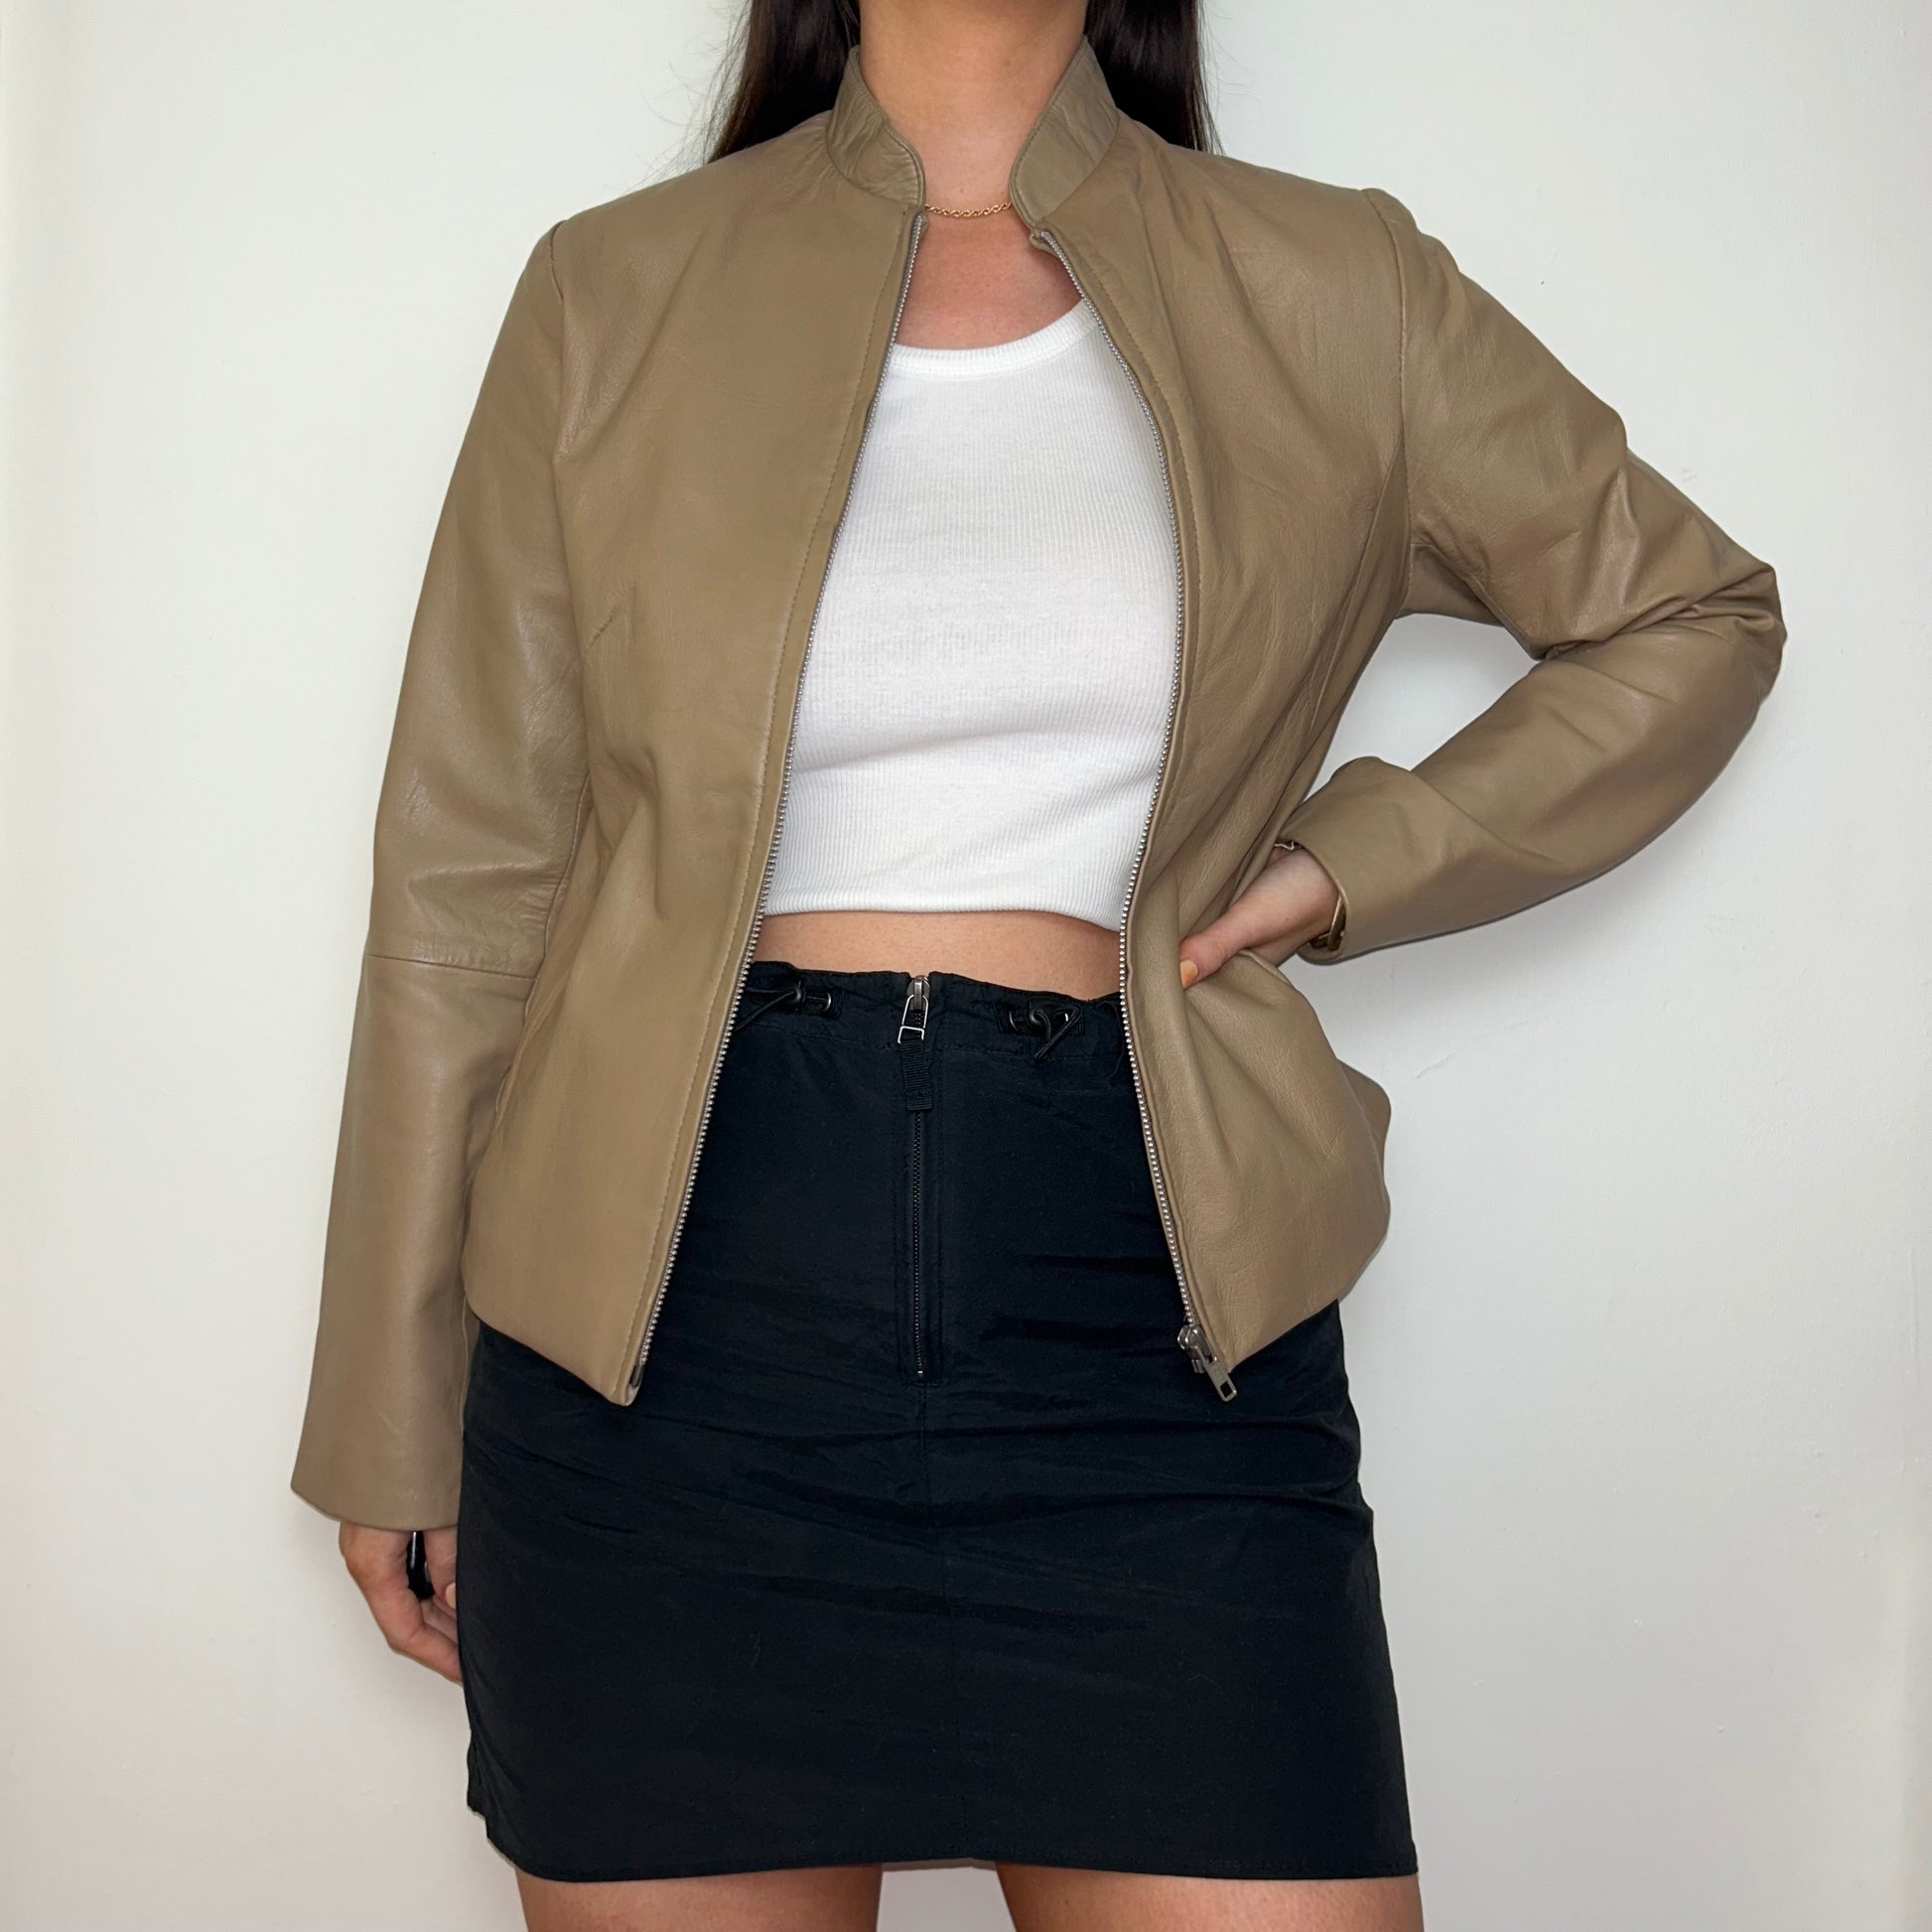 tan beige real leather jacket shown on a model wearing a white crop top and black mini skirt